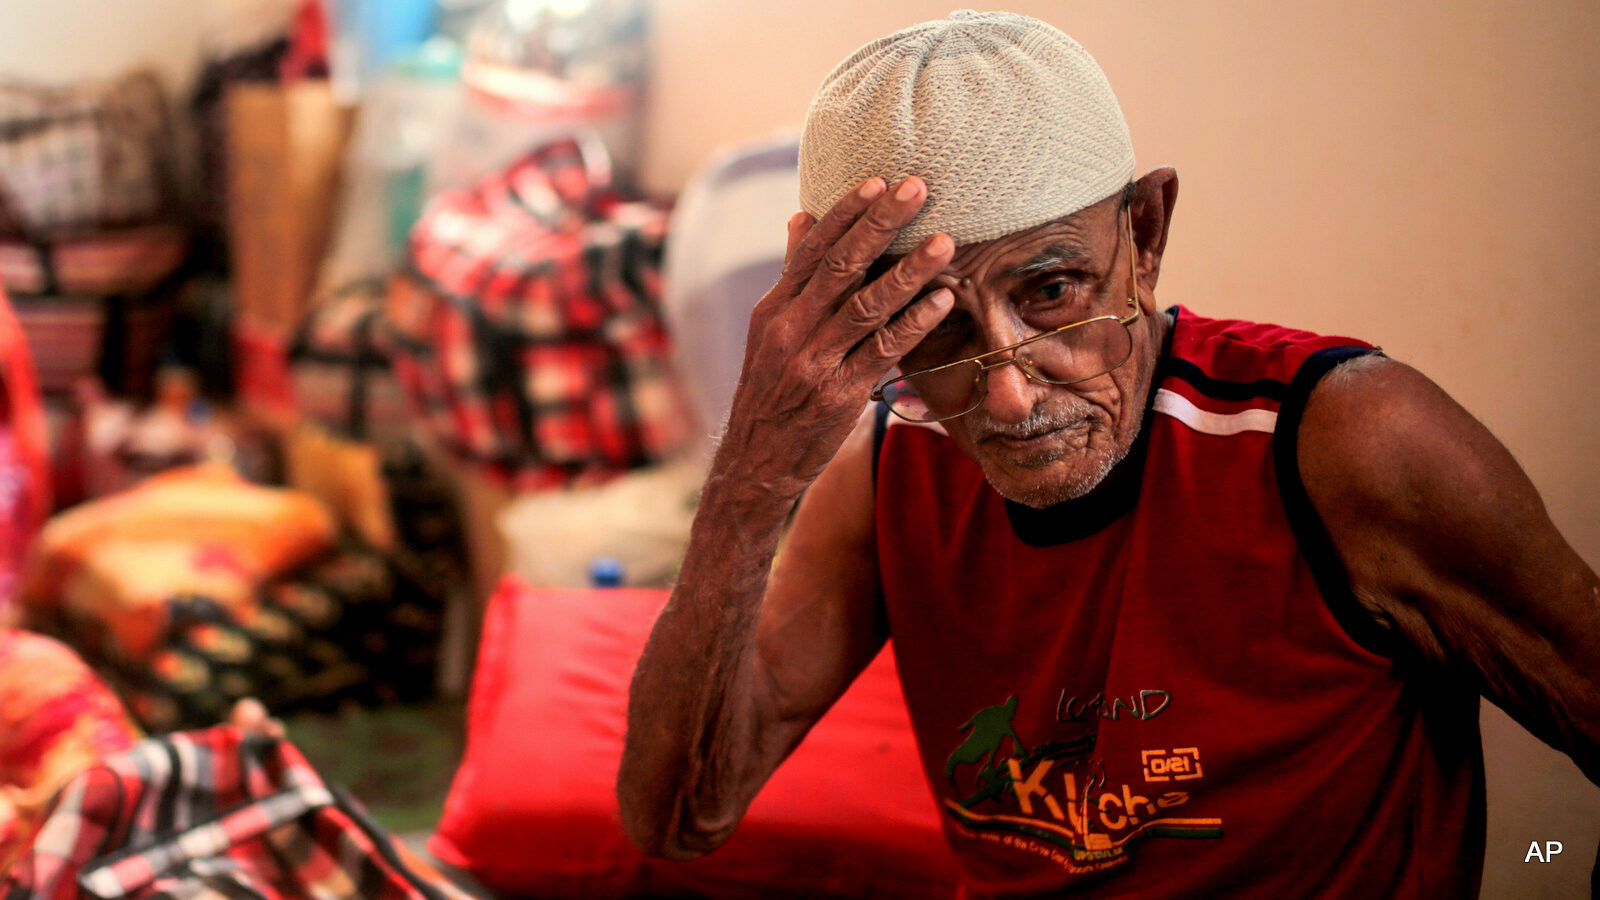 In this Tuesday, May 19, 2015 photo, Ibrahim Mohamed, 80, and the oldest refugee at the center, who is both blind and deaf, adjusts his hat, at an orphanage that has been turned into a center for Yemeni refugees, in Obock, northern Djibouti. Fleeing the war at home, thousands of Yemenis have made it across the Gulf of Aden to find refuge in Djibouti, a sleepy Horn of Africa nation where the United Nations has set up a staging hub for aid for the conflict-torn Arab country.